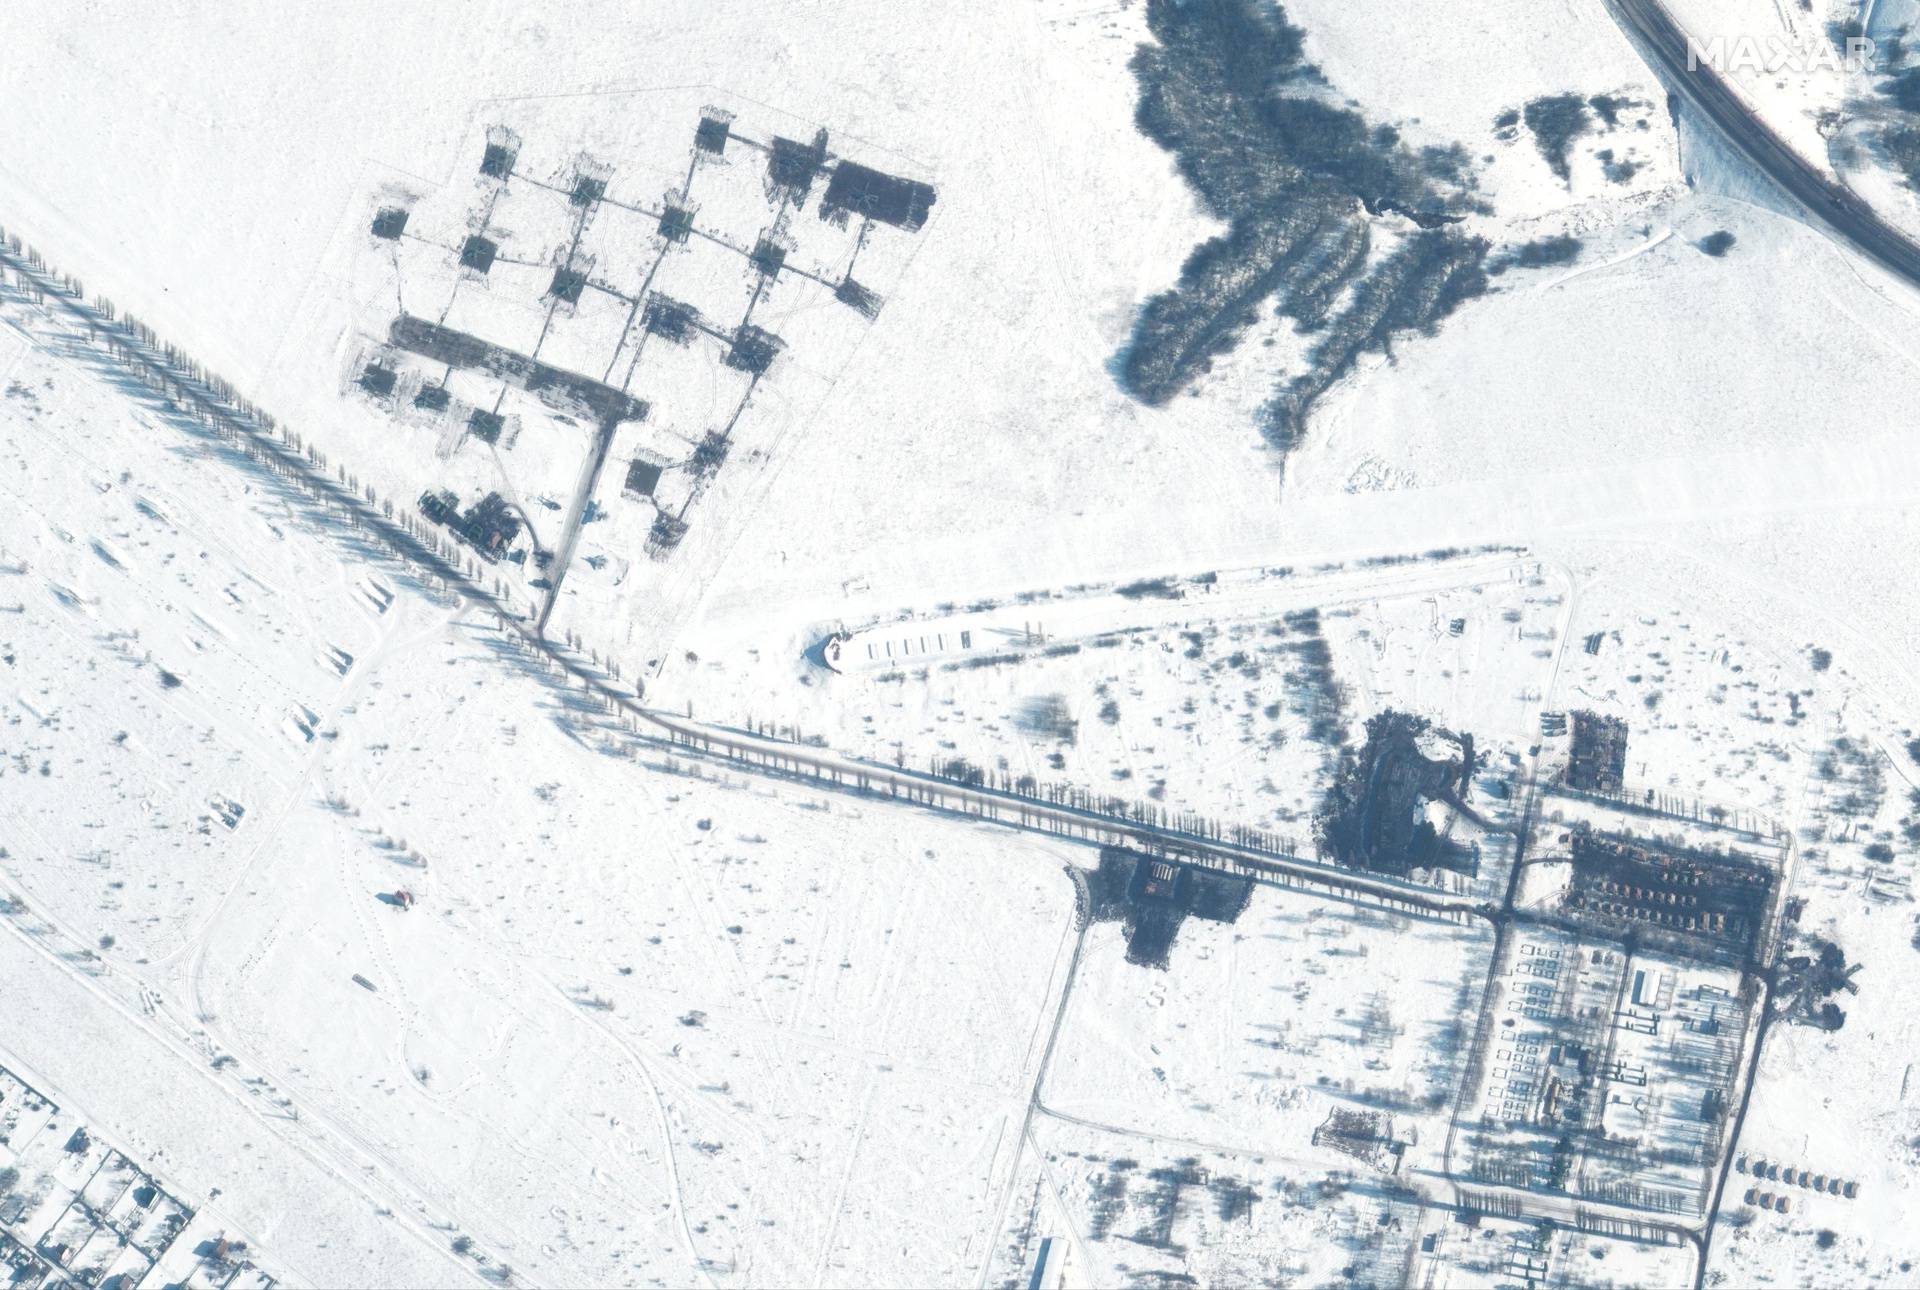 A satellite image shows an overview of a helicopter unit and troops in Belgorod